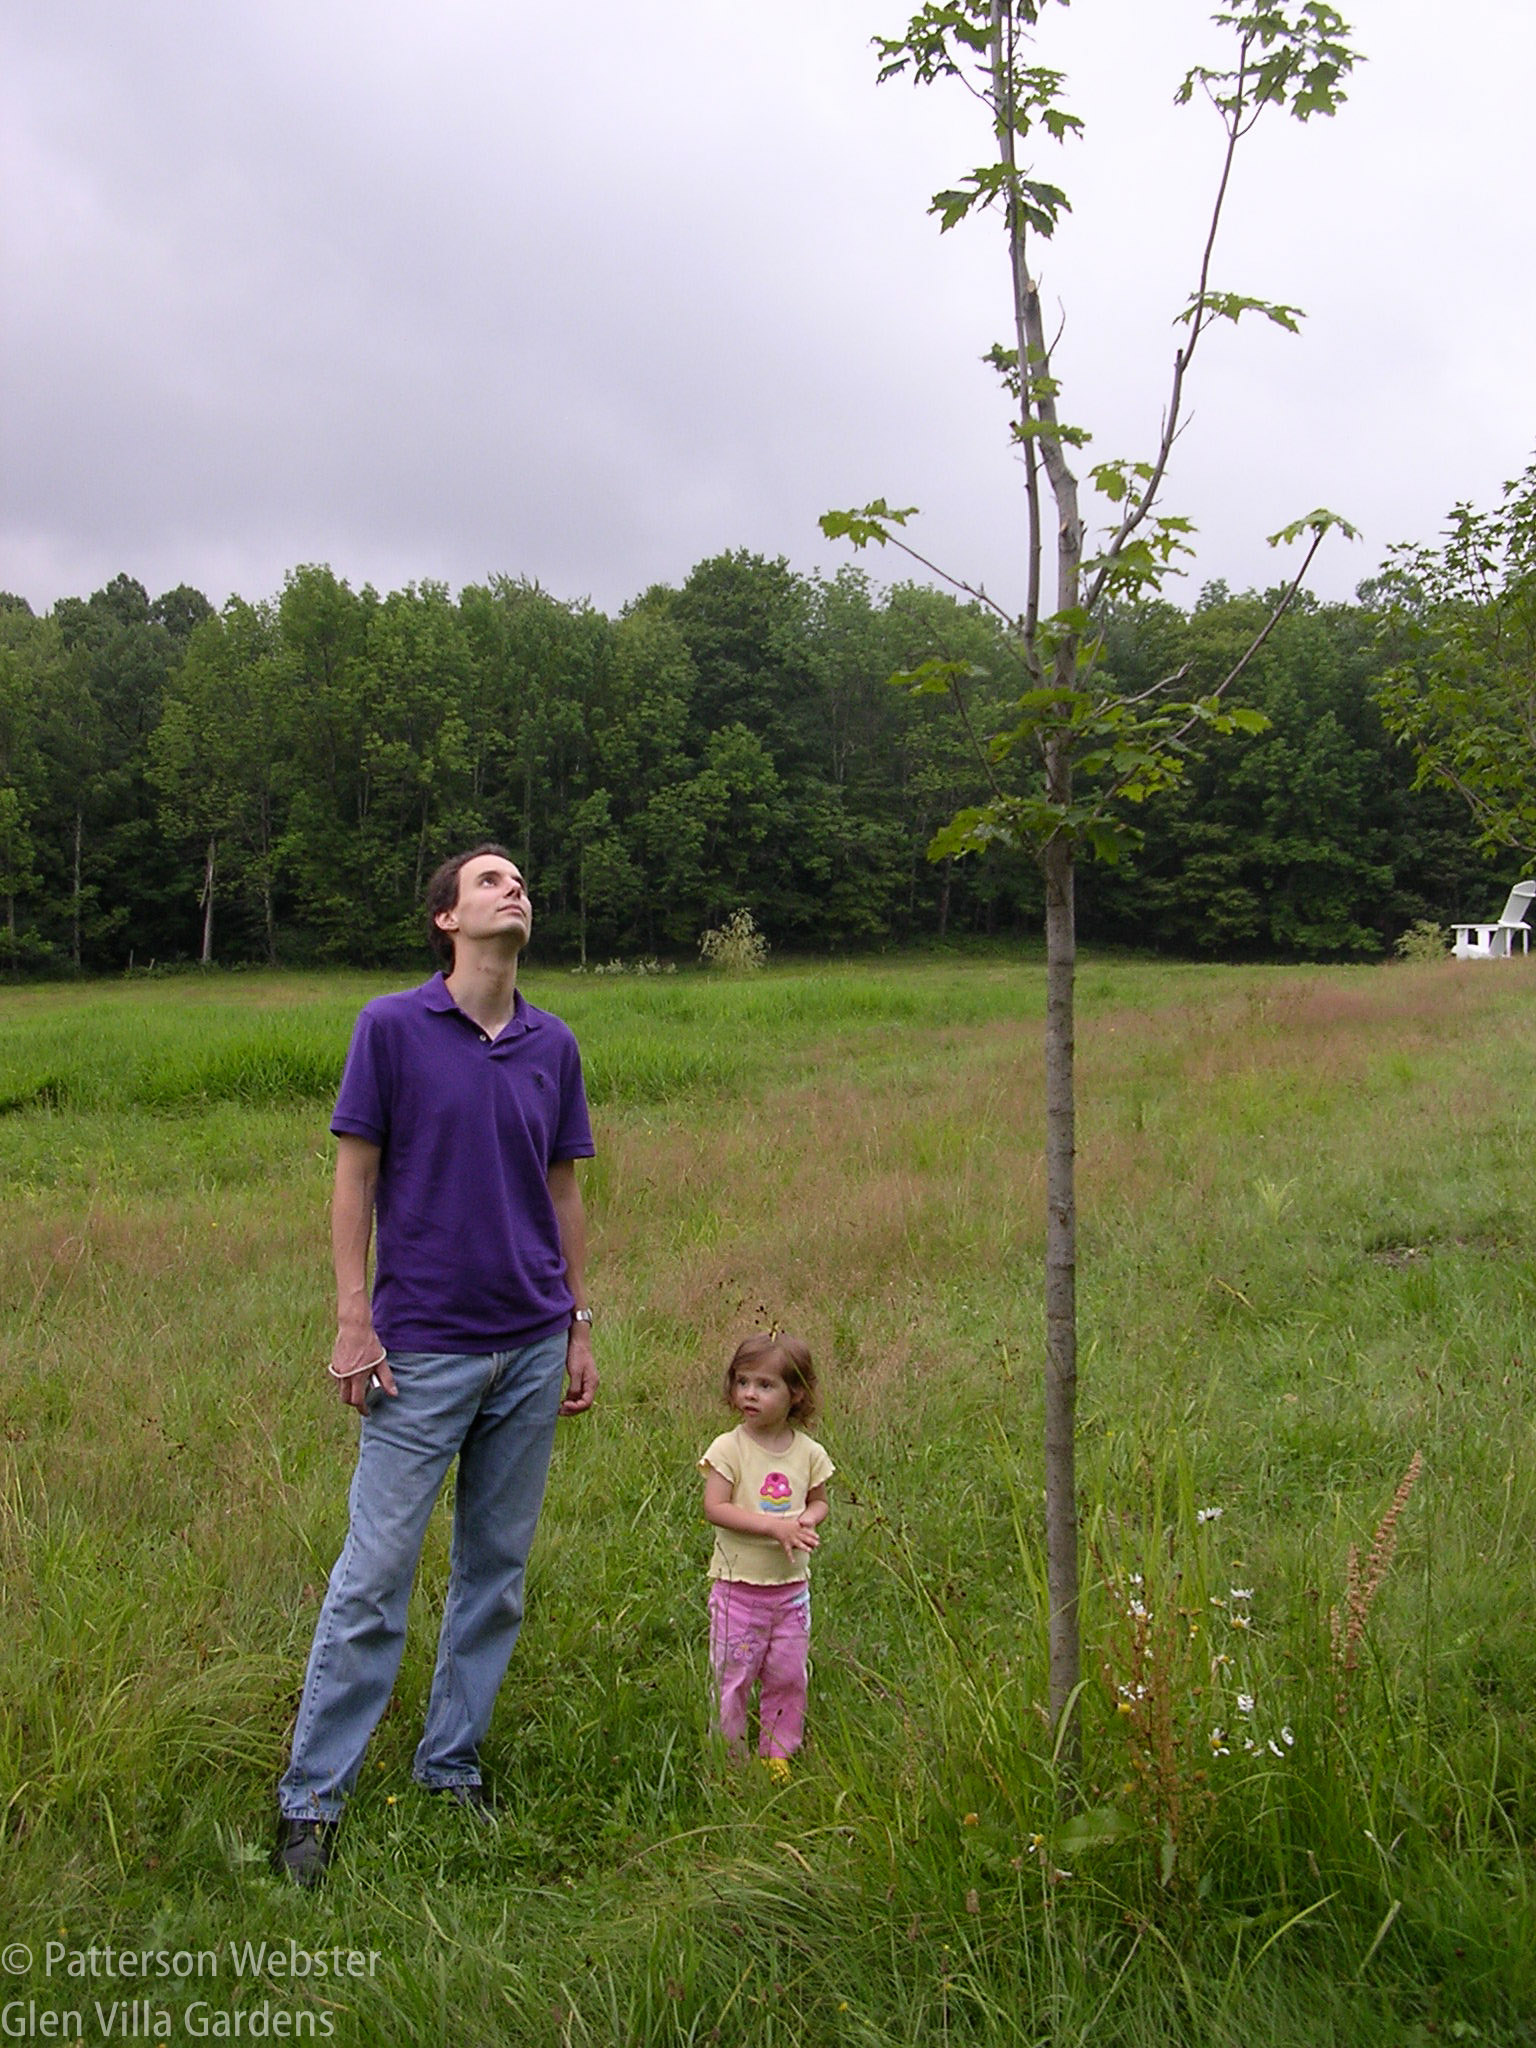 One grandchild stands next to her tree along with her father.